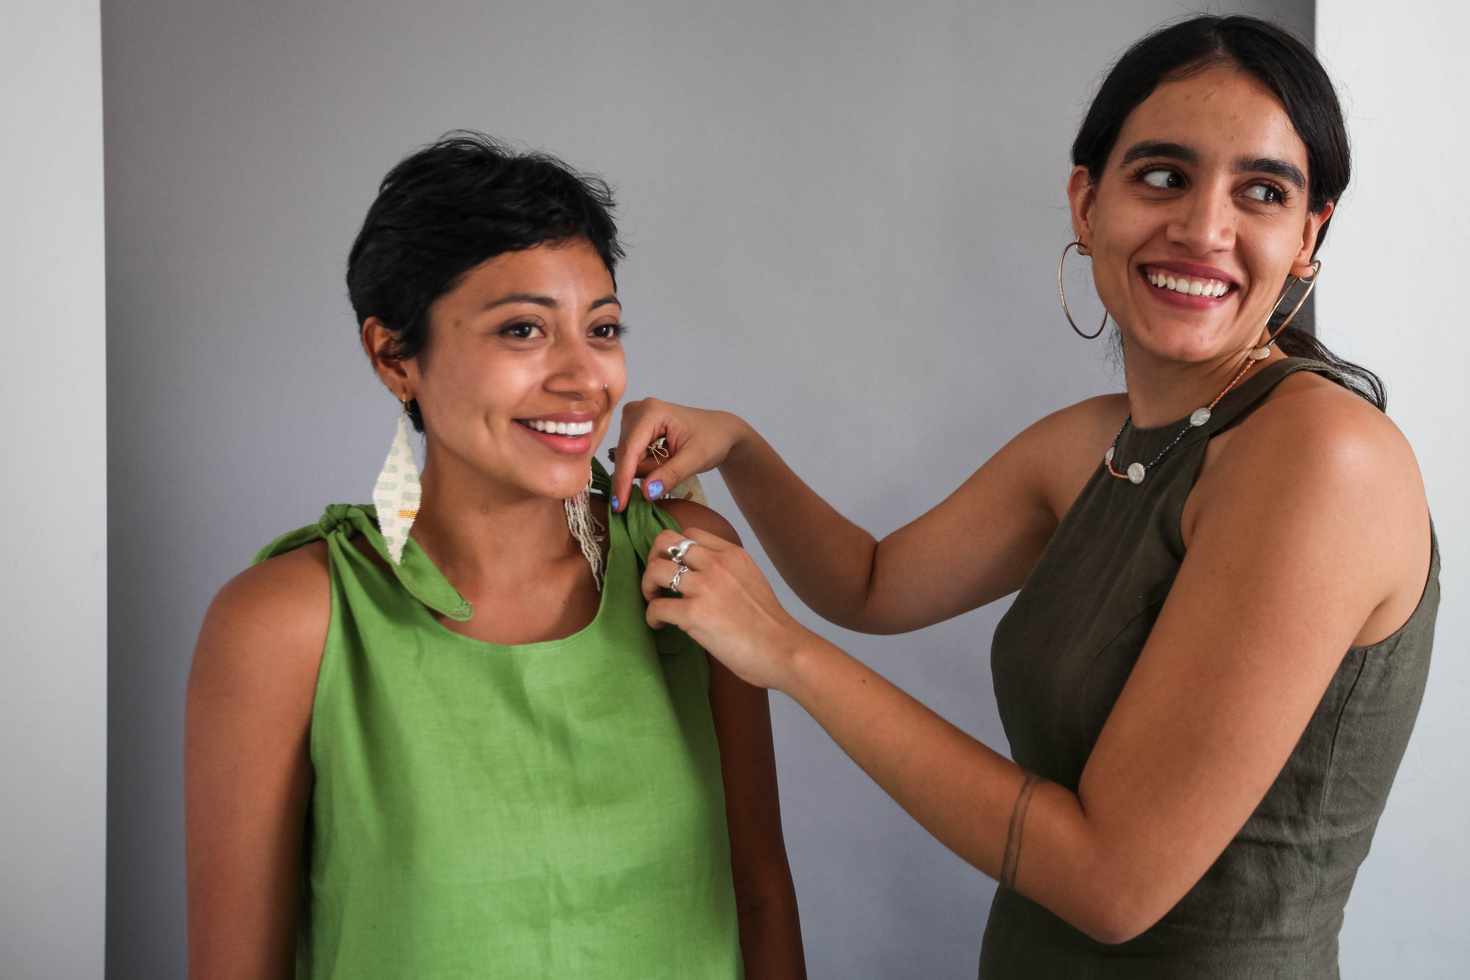 Smiling Women Wearing Sleeveless Clothes